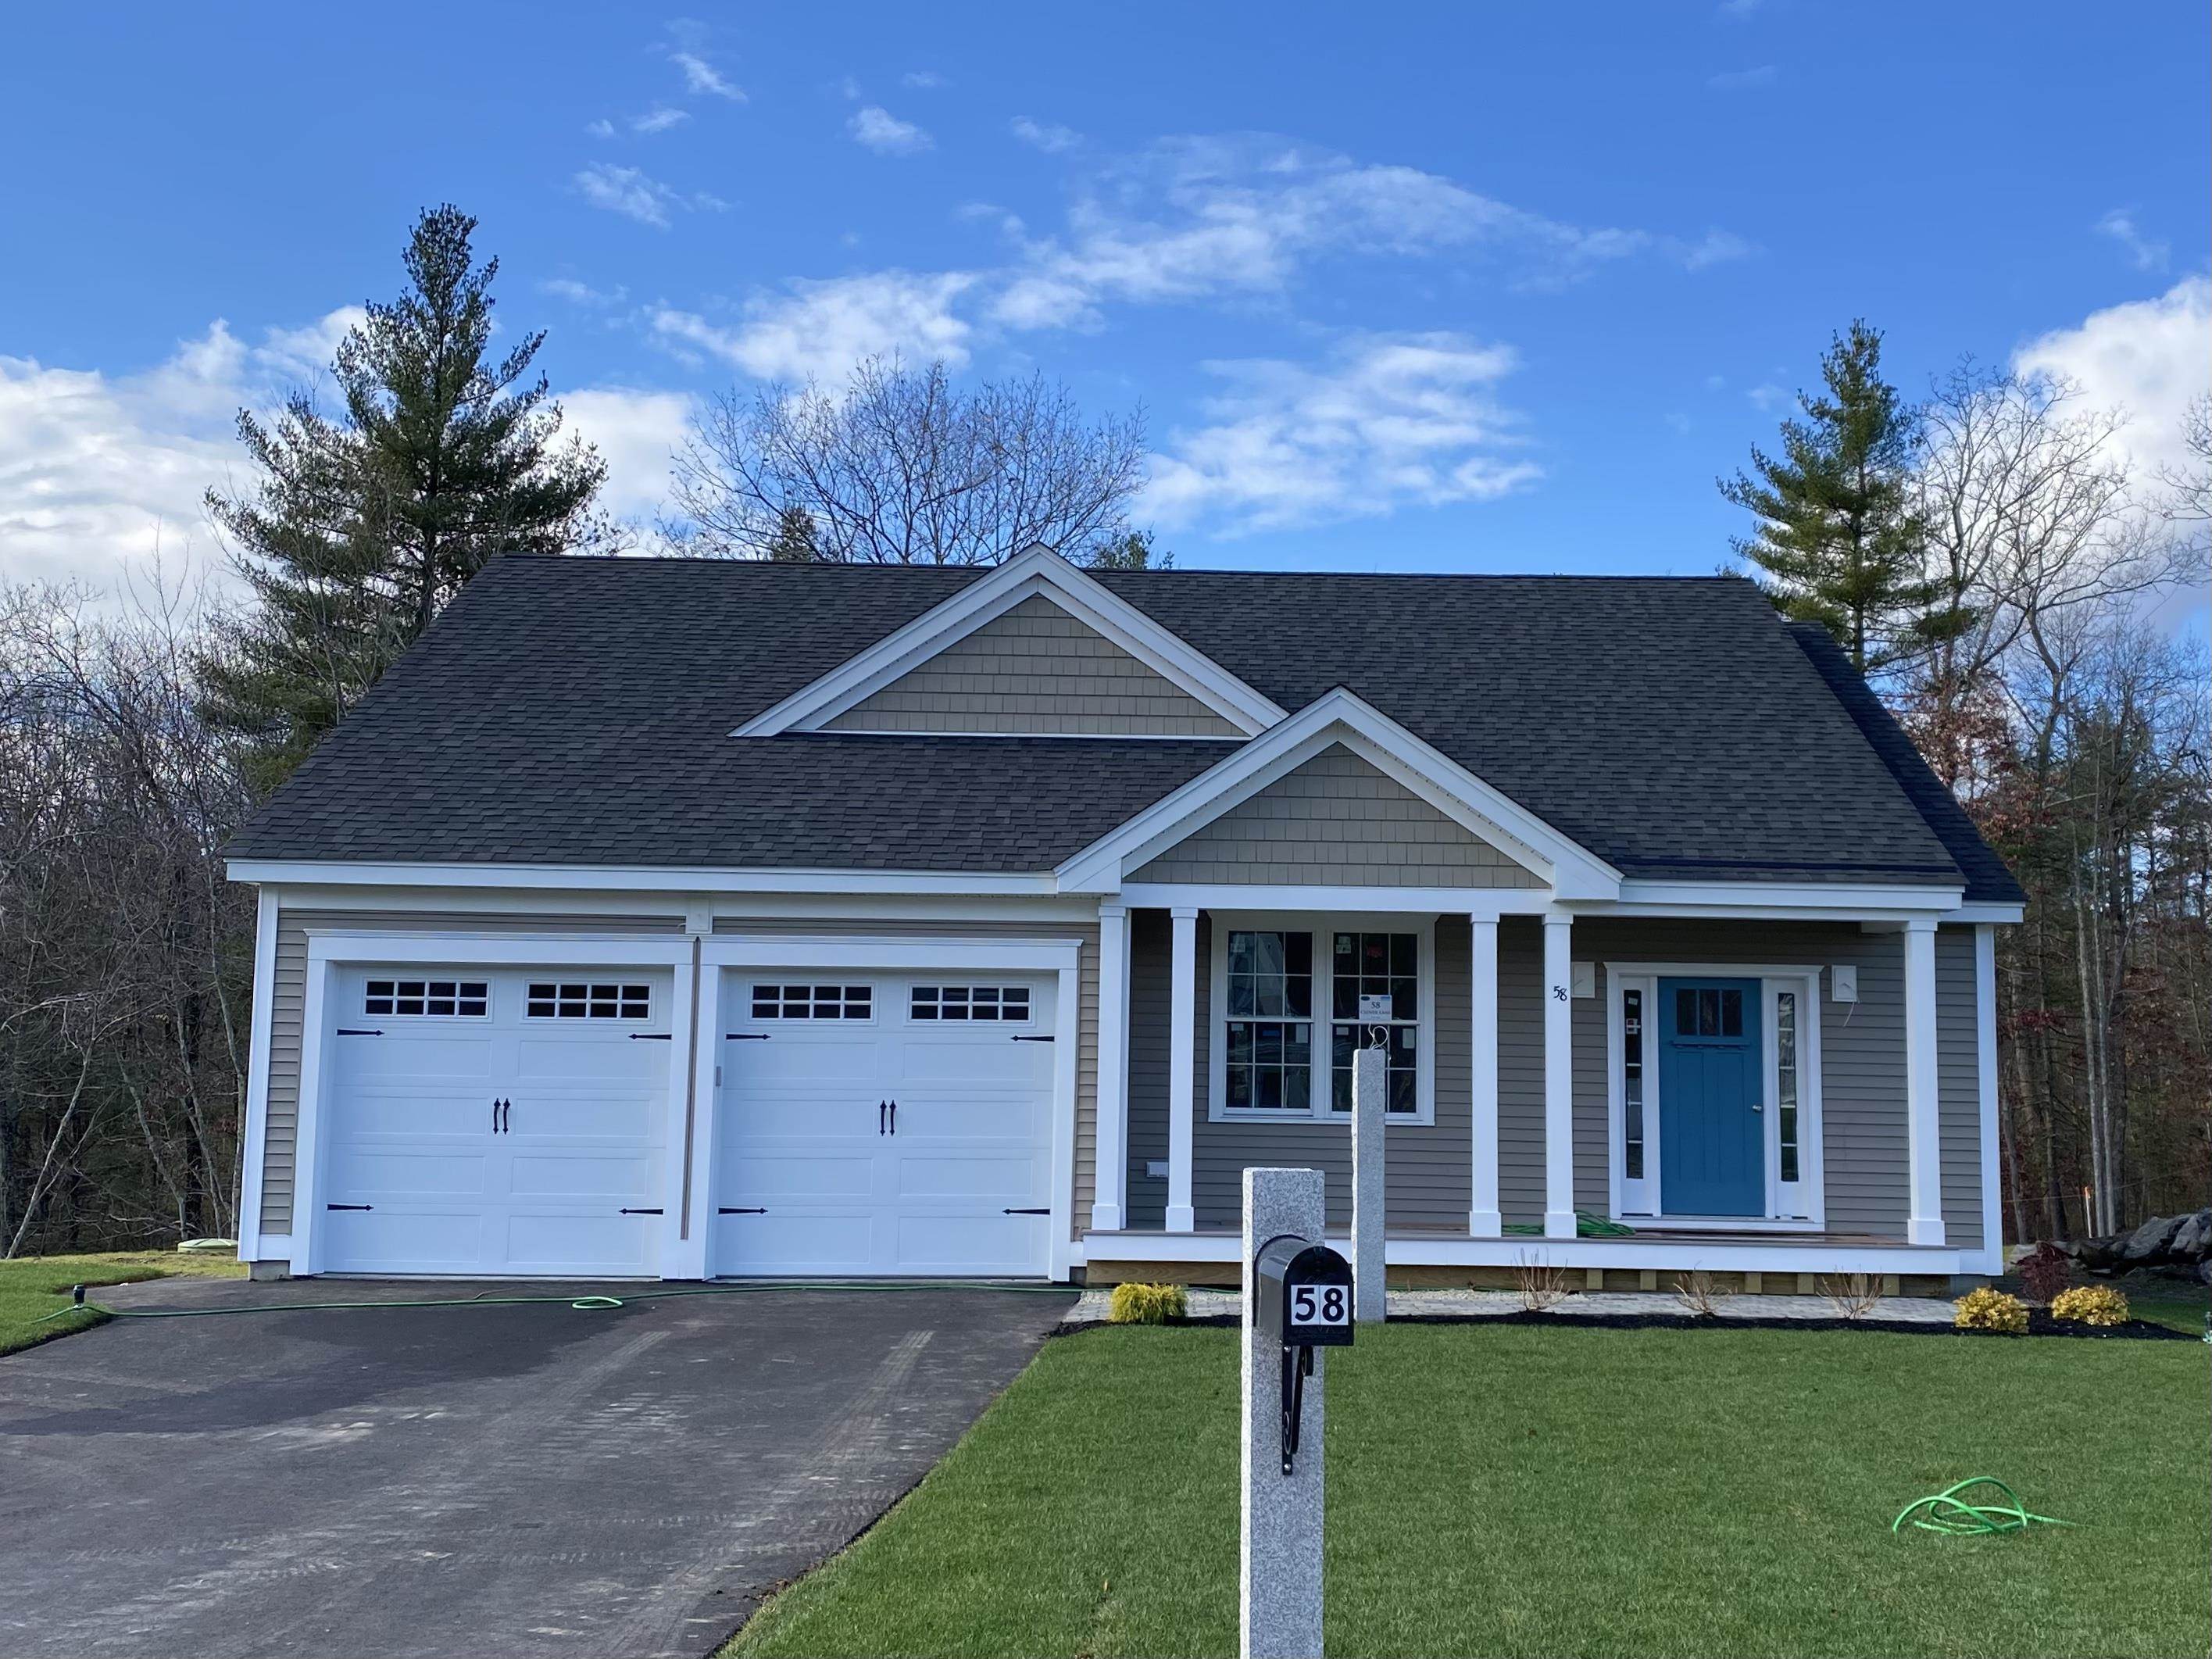 Lot 120 Lorden Commons Lot 120, Londonderry, NH 03053